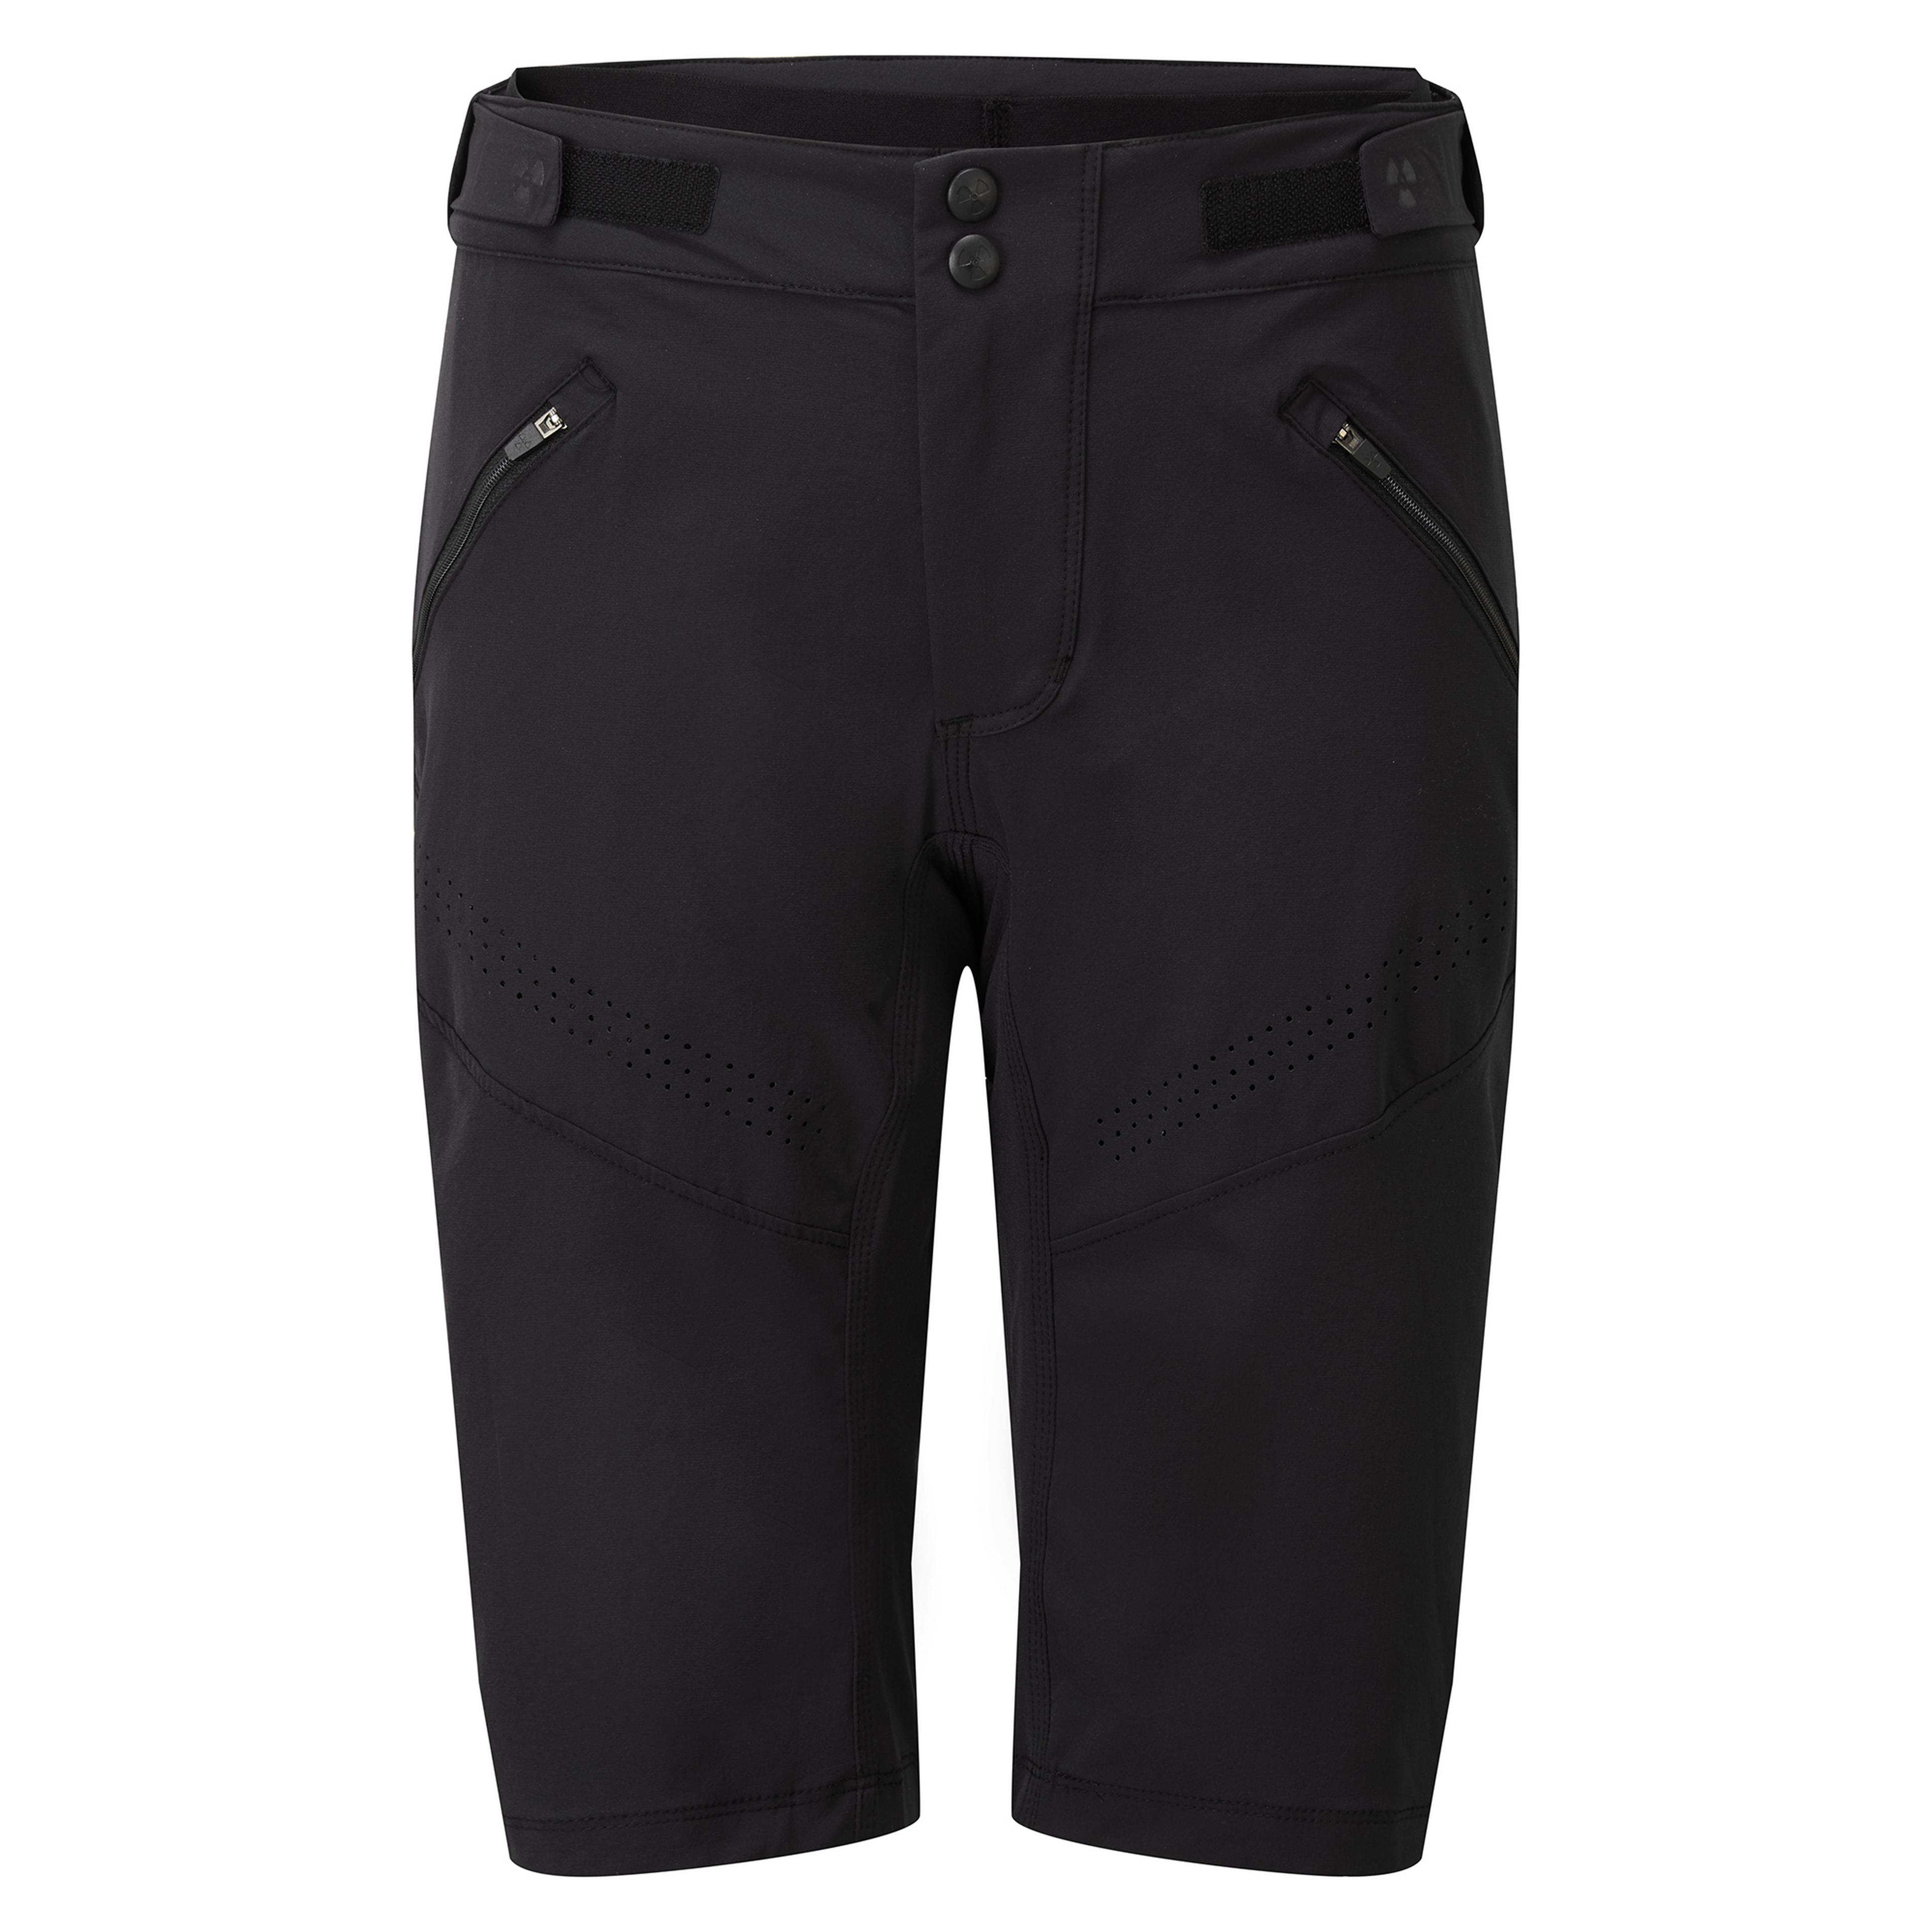 Nukeproof Blackline Women's Shorts with Liner